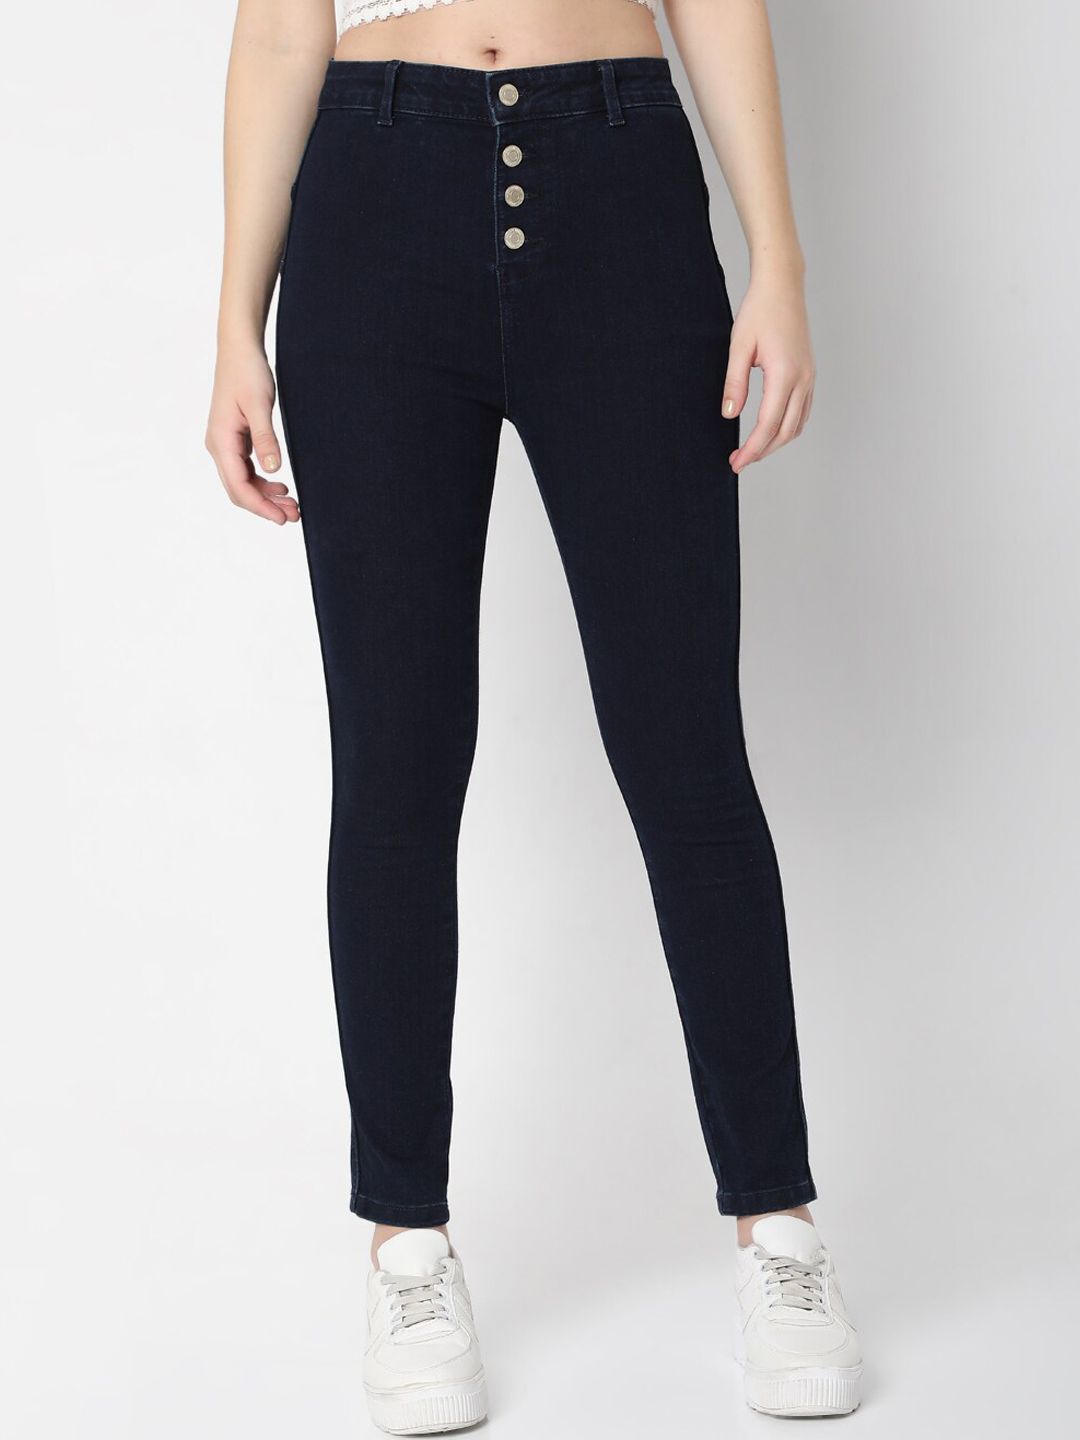 Vero Moda Women Blue High-Rise Stretchable Jeans Price in India